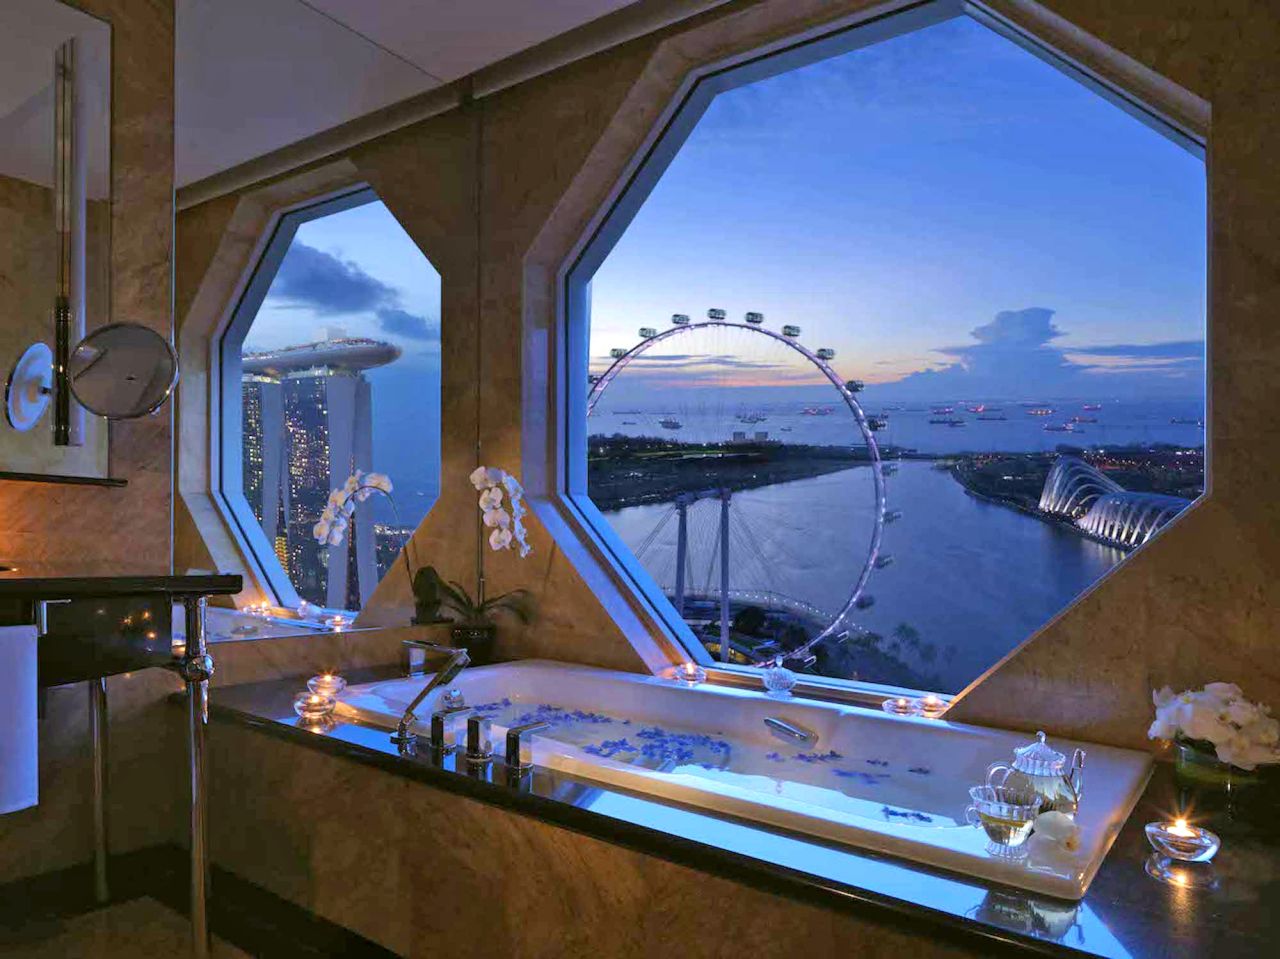 Marble bathrooms in the Ritz-Carlton, Millenia Singapore's bay view rooms overlook the iconic Marina Bay Sands, Singapore Flyer and city skyline.